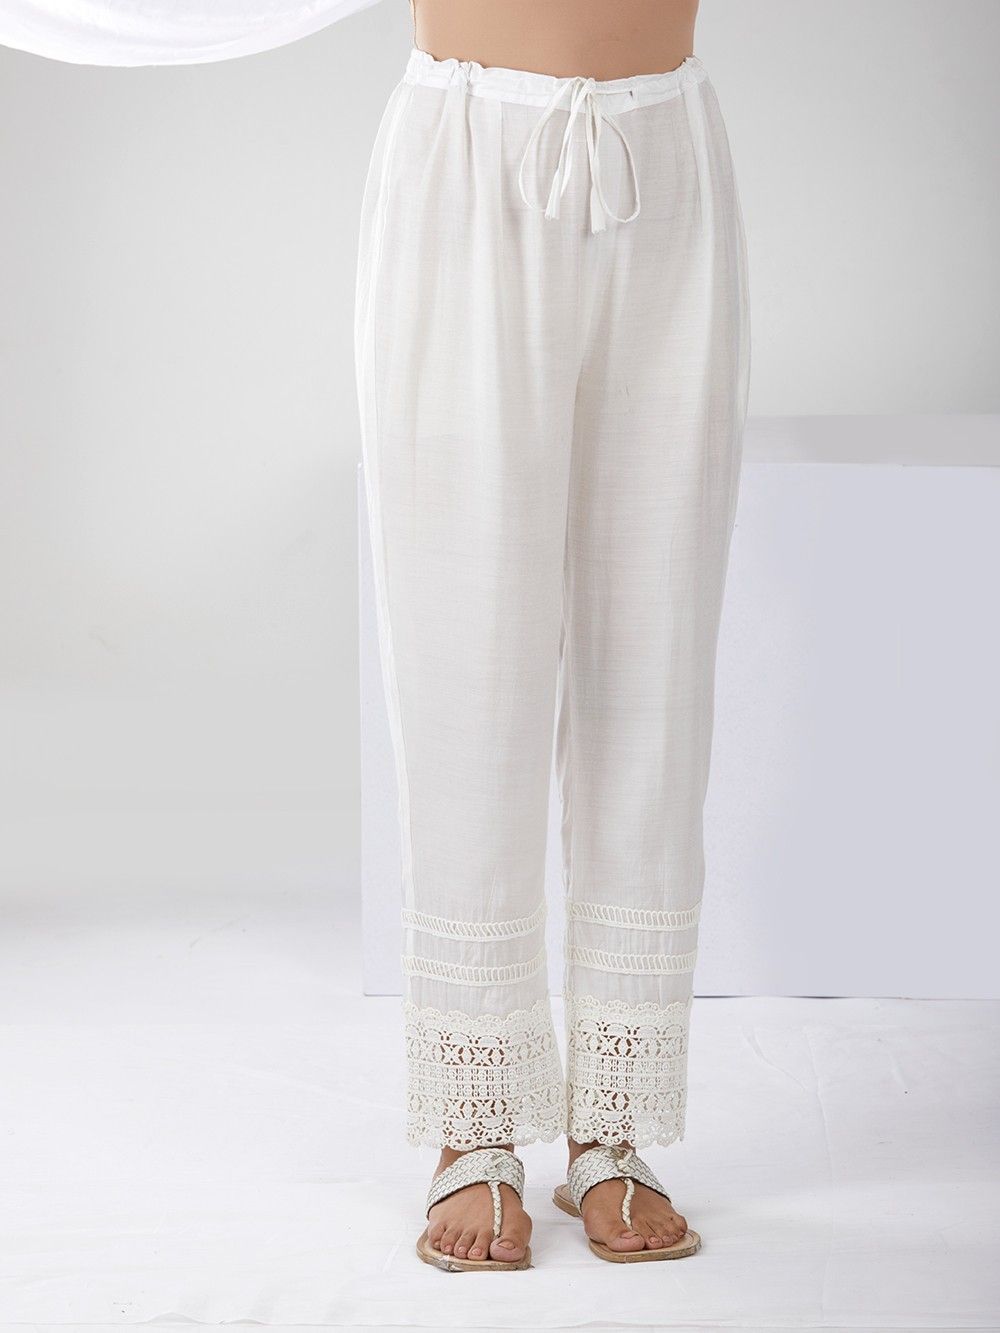 Lace embroidered pants - Lizzy Lou Boutique